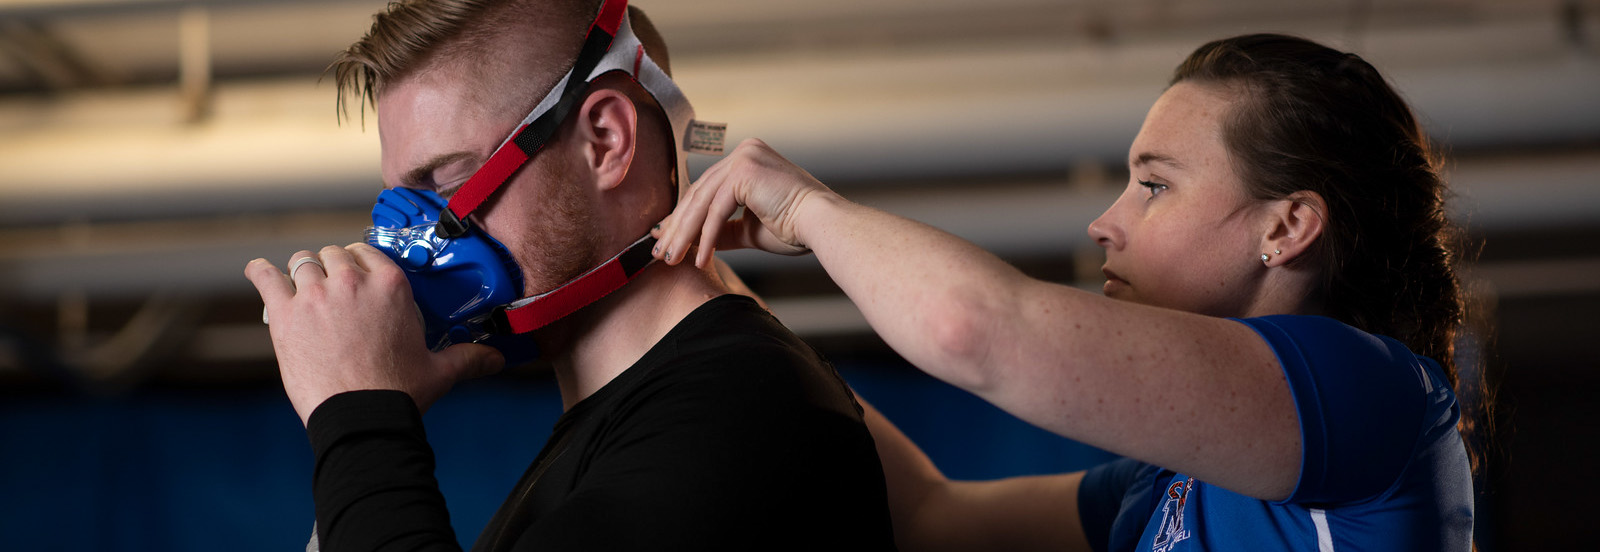 Sport Scientist help client with treadmill mask